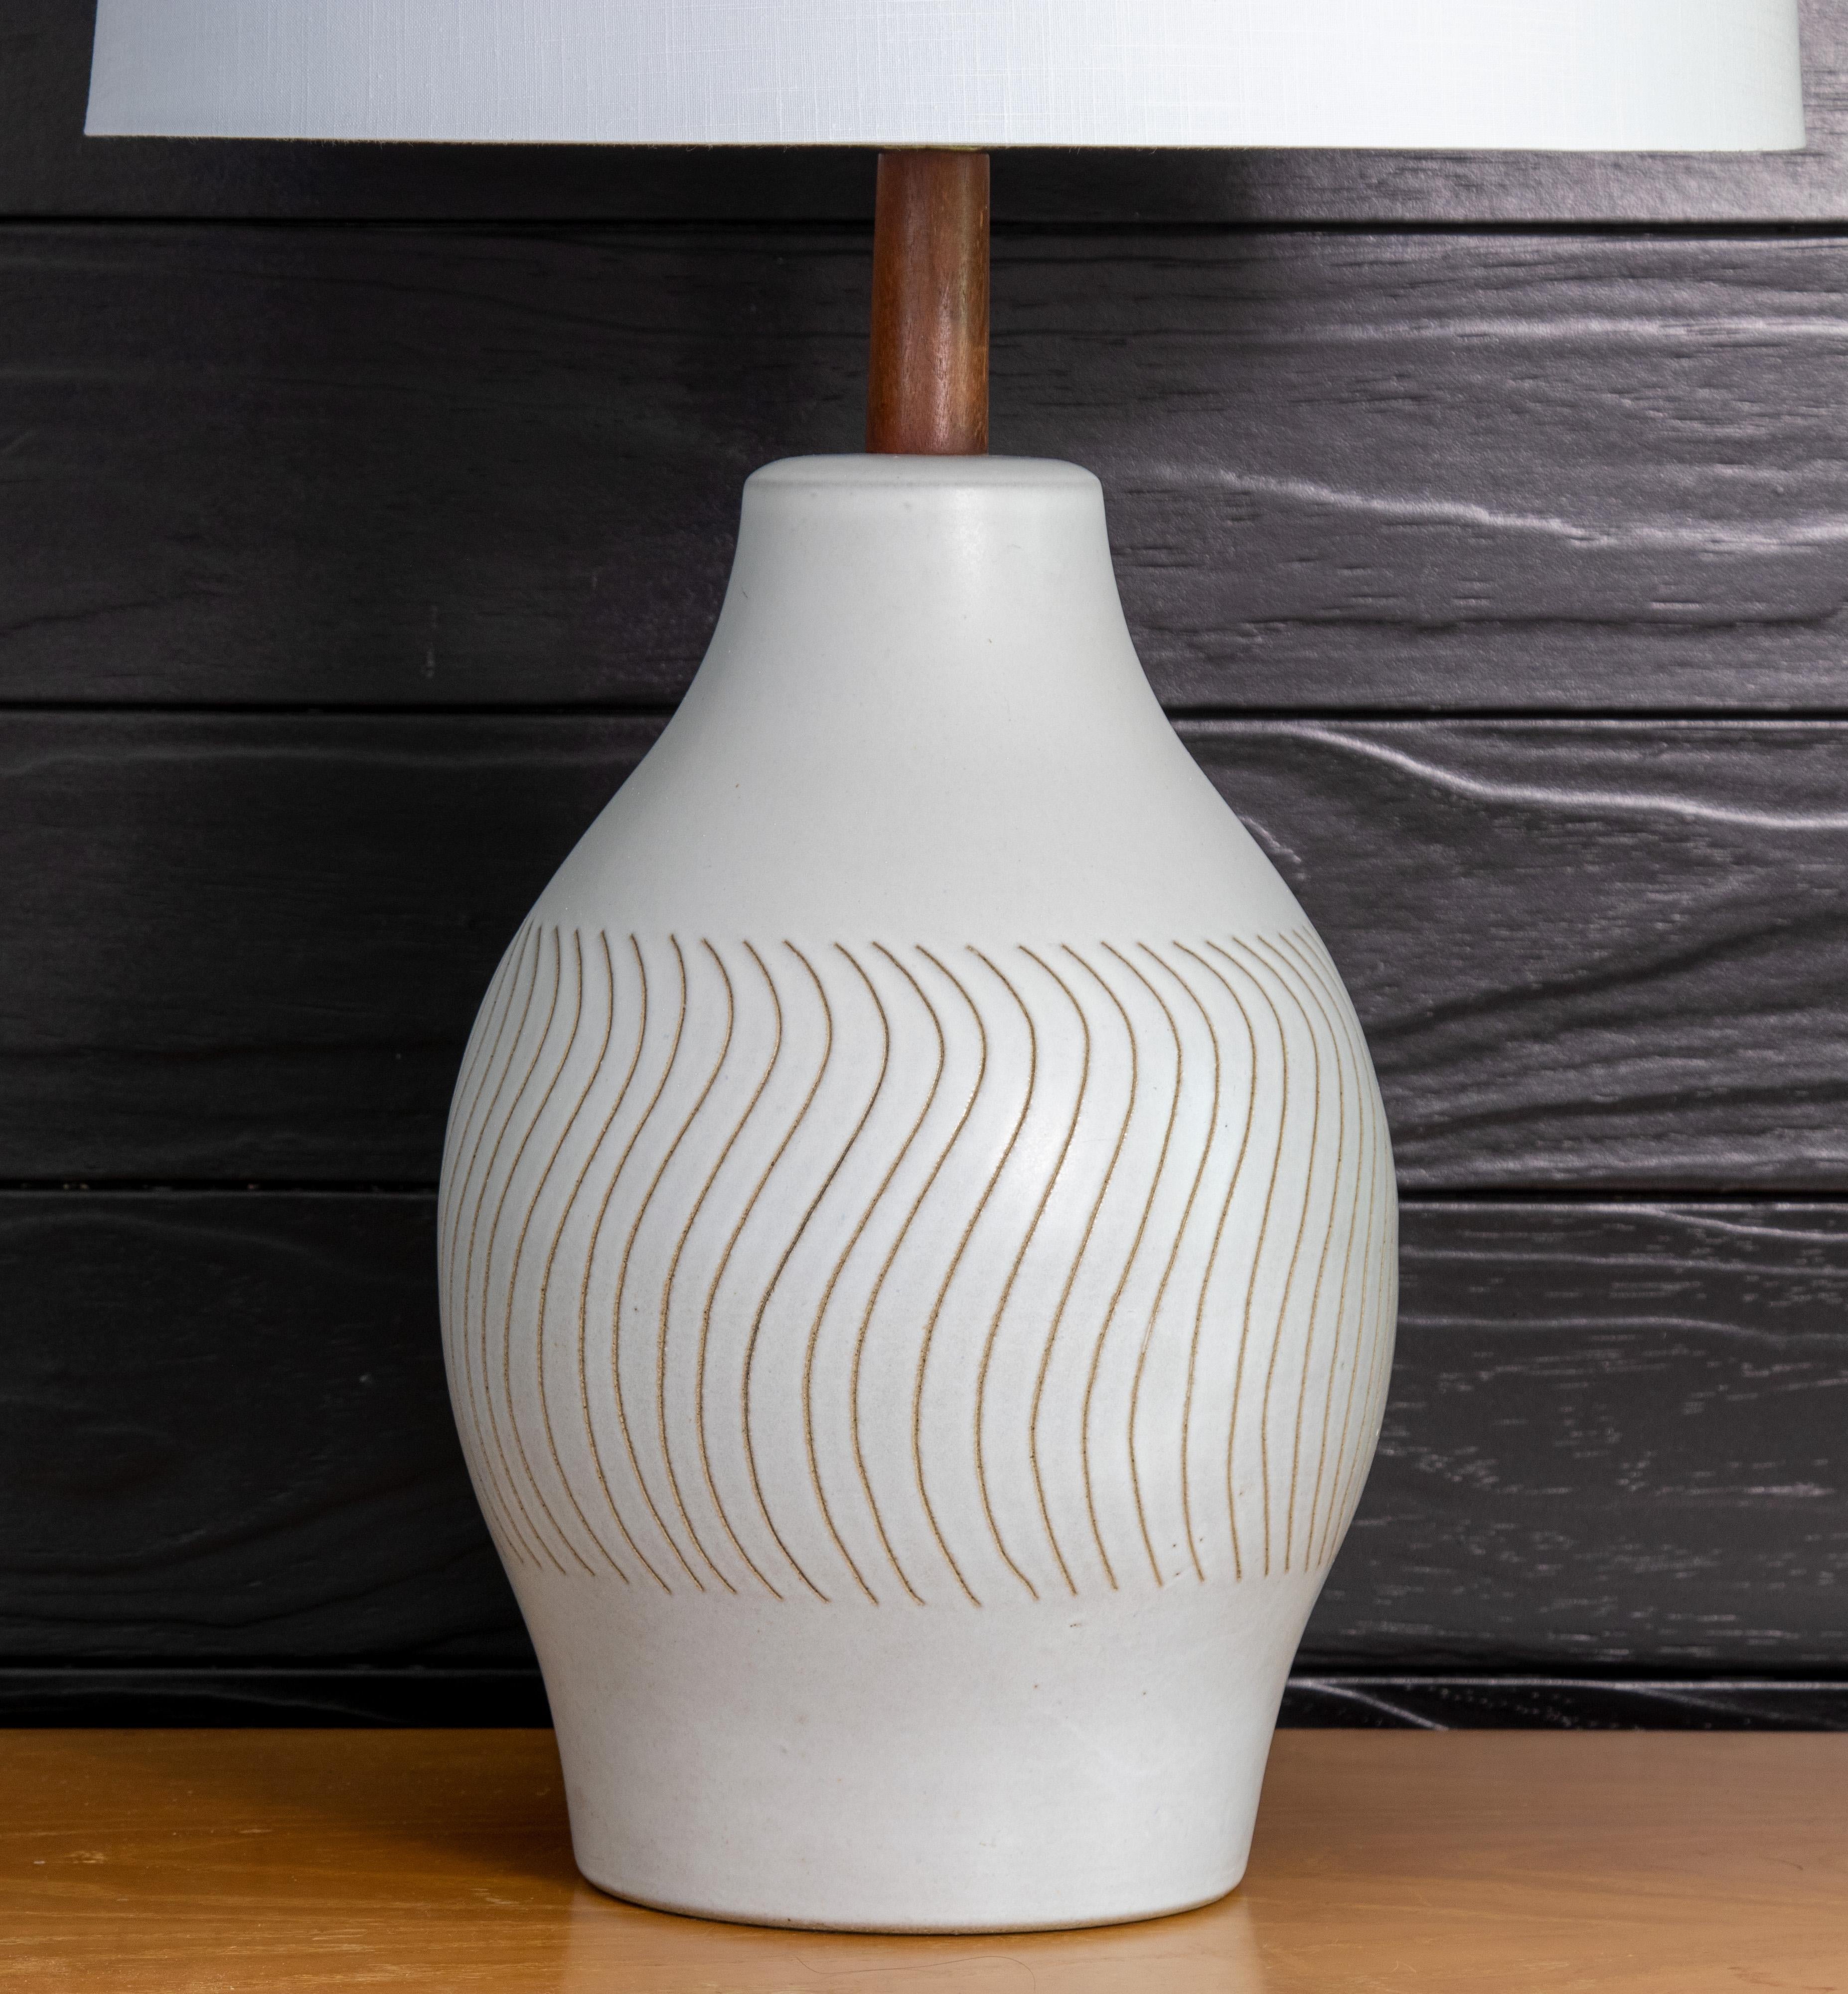 1960s Gordon and Jane Martz White Incised Table lamp M197 for Marshall Studios In Good Condition For Sale In Virginia Beach, VA